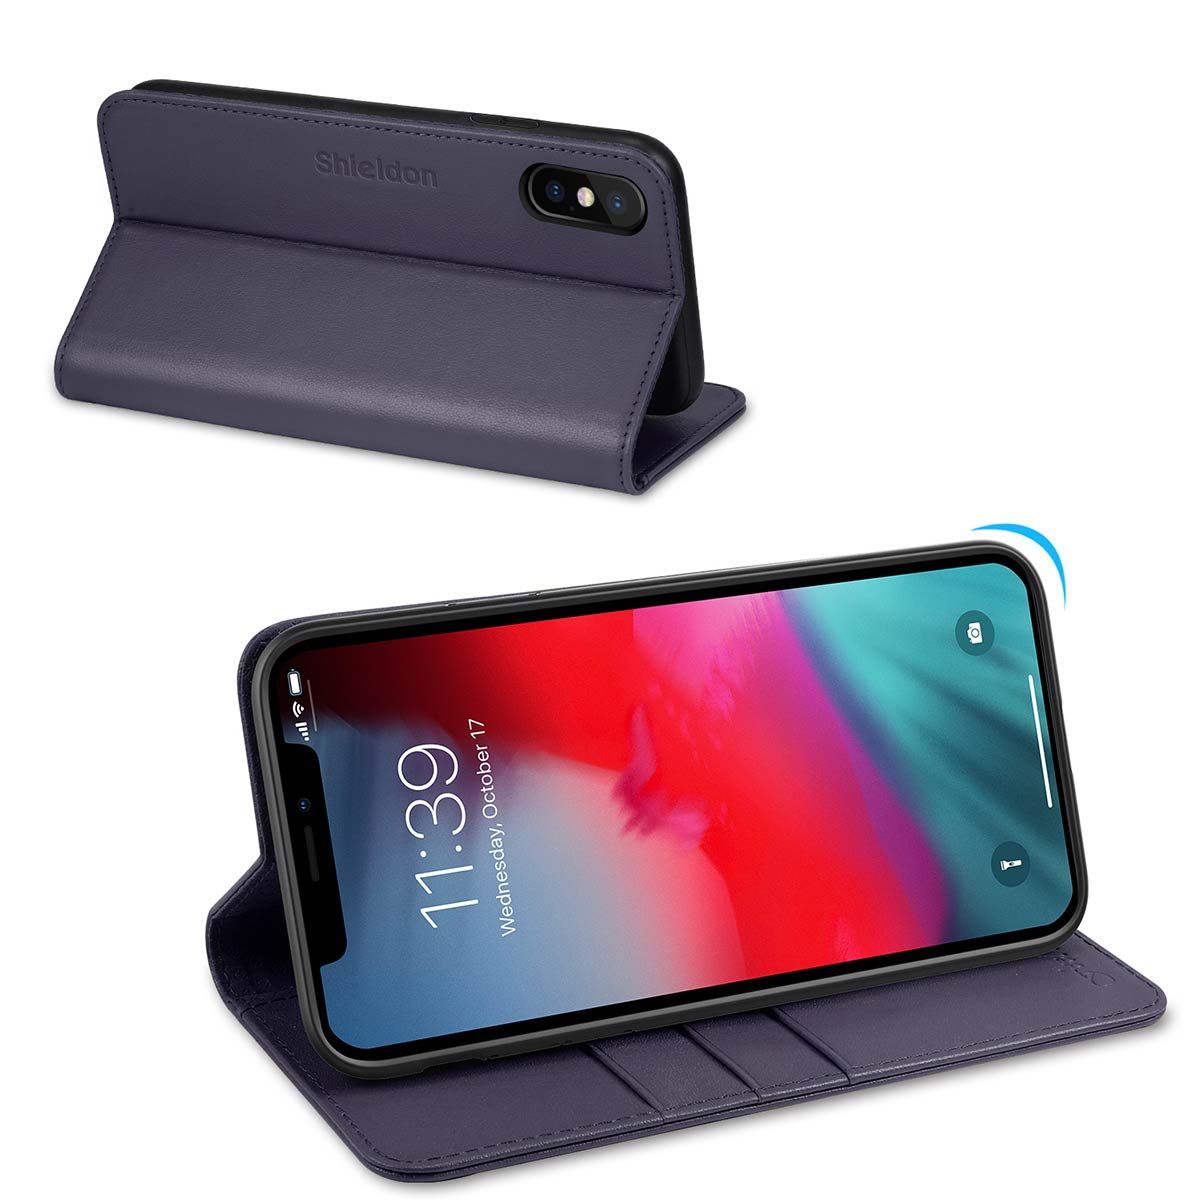 Flip Case Fit for iPhone Xs Premium Card Holders Kickstand Leather Cover Wallet for iPhone Xs 